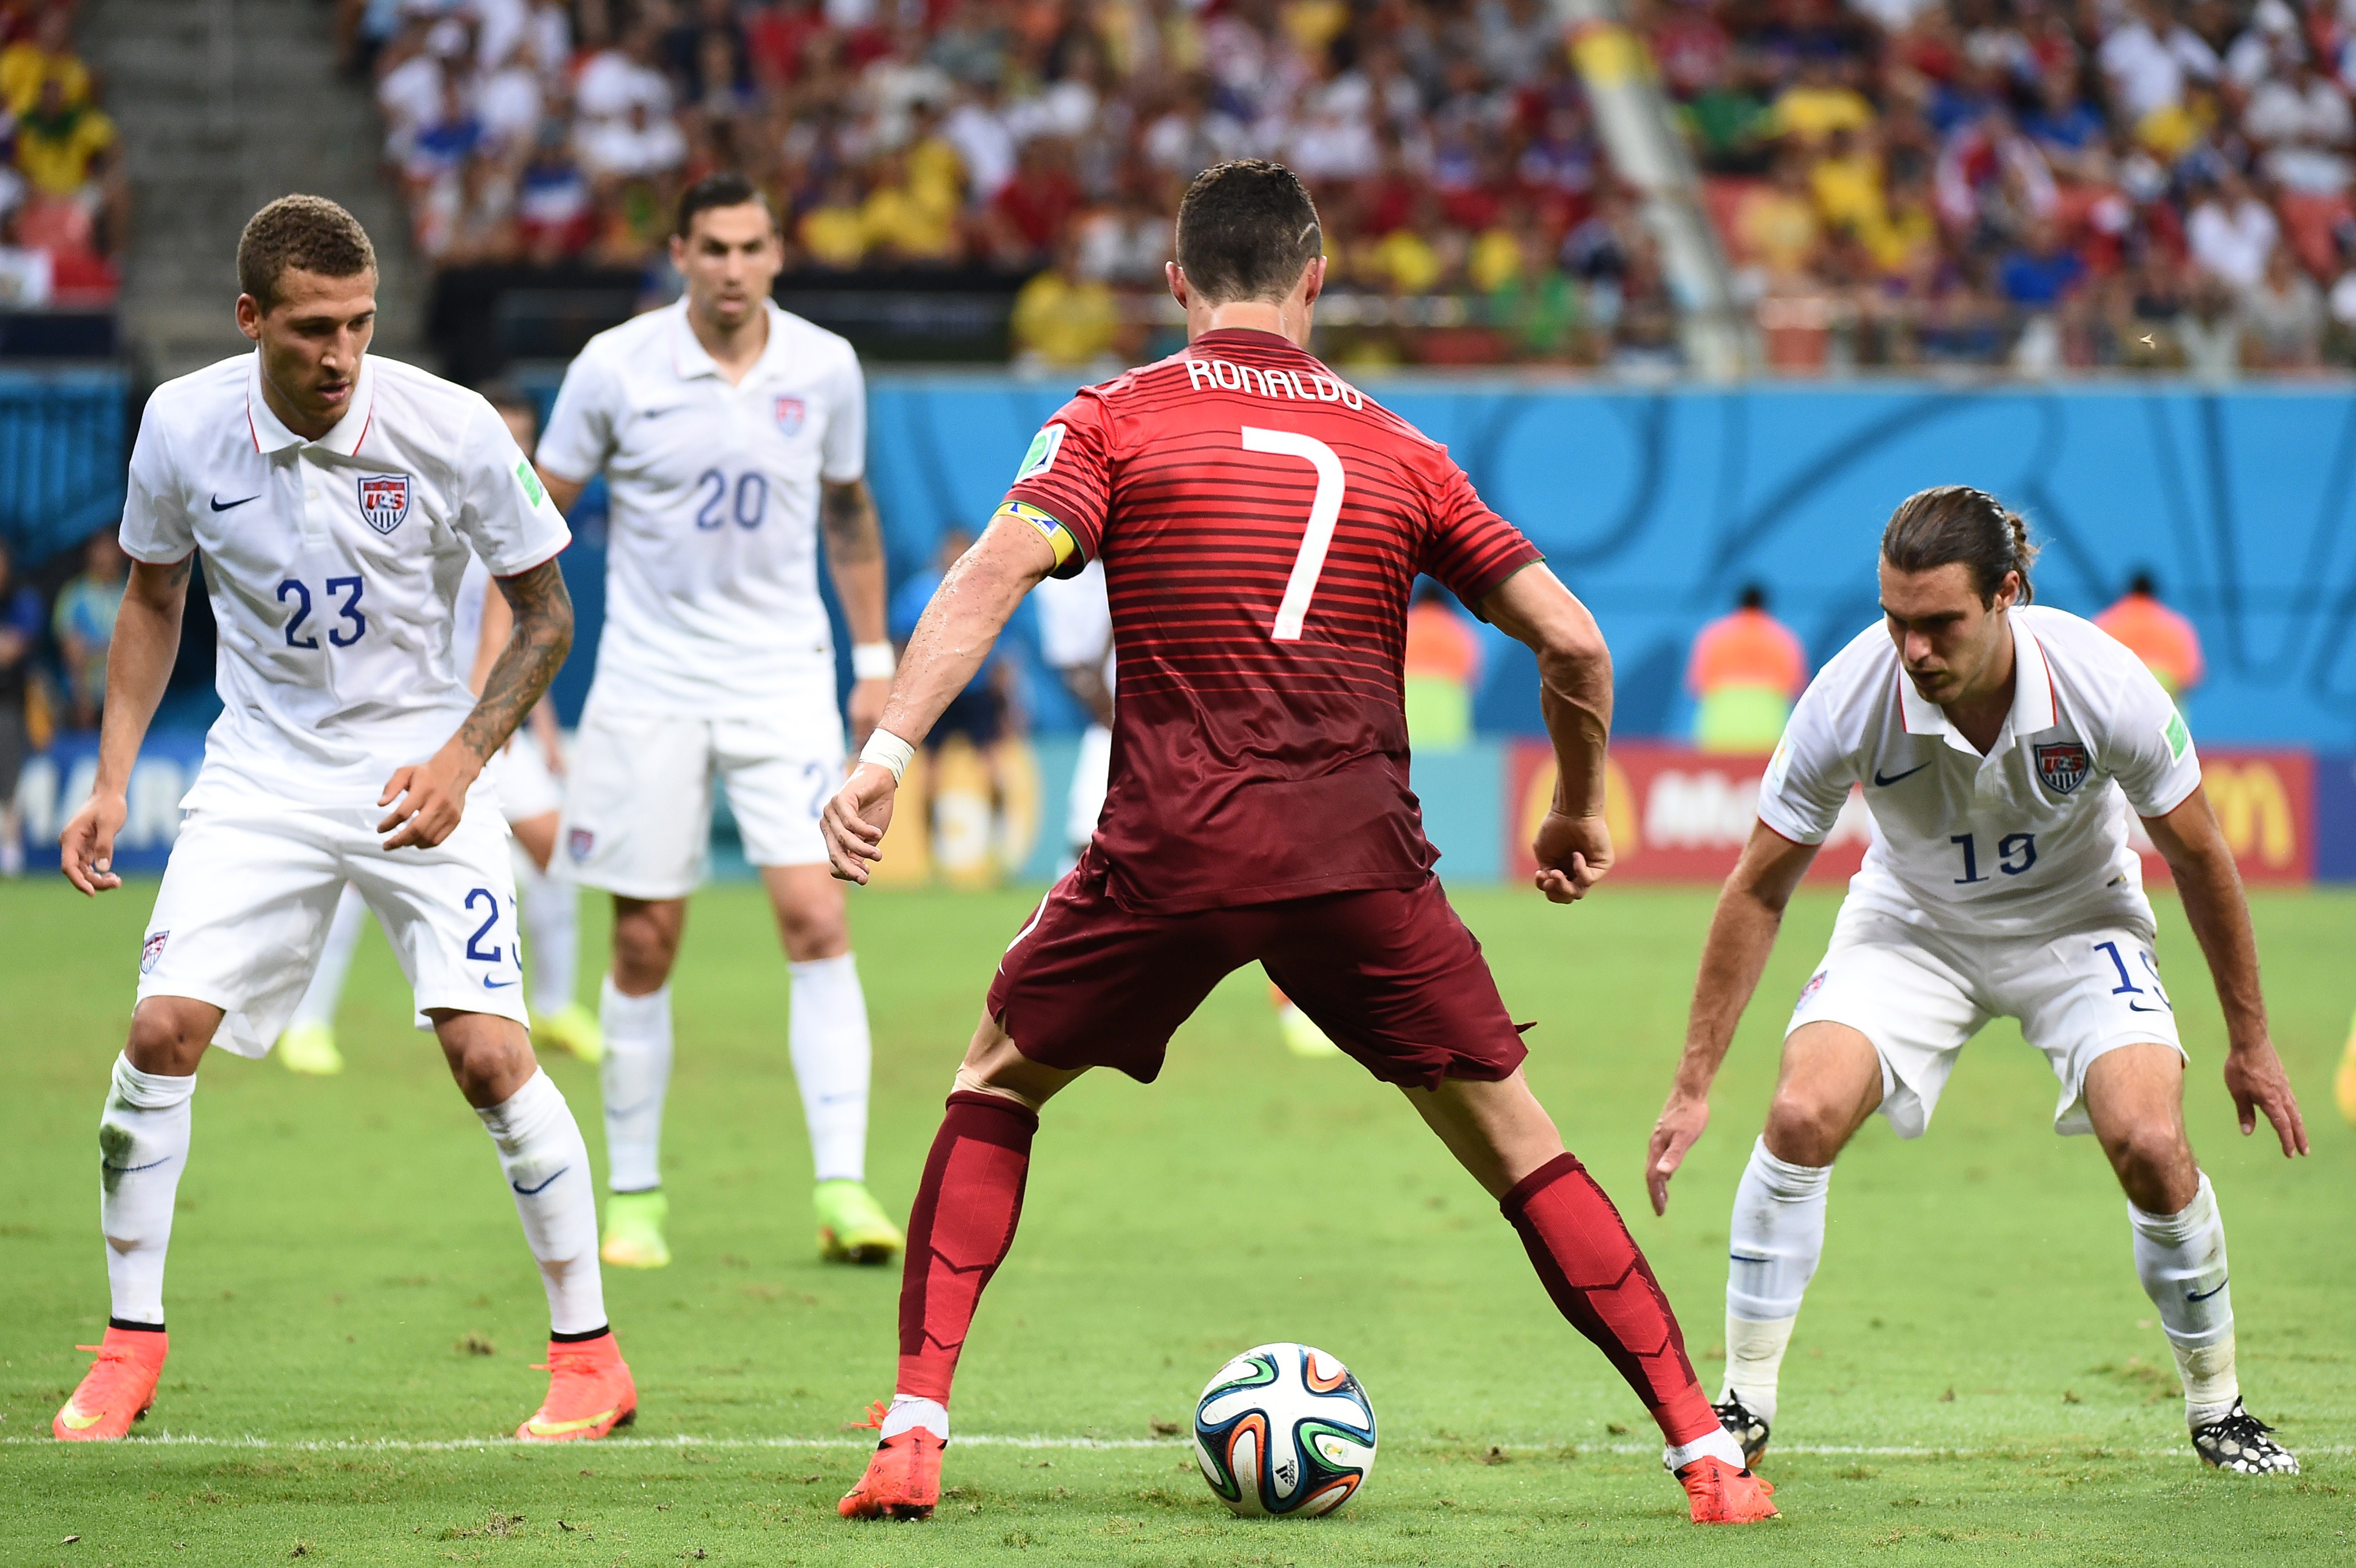 dekorere Seraph elskerinde World Cup 2014: Record U.S. TV ratings sure sign of soccer's rapid growth  here - CBS News